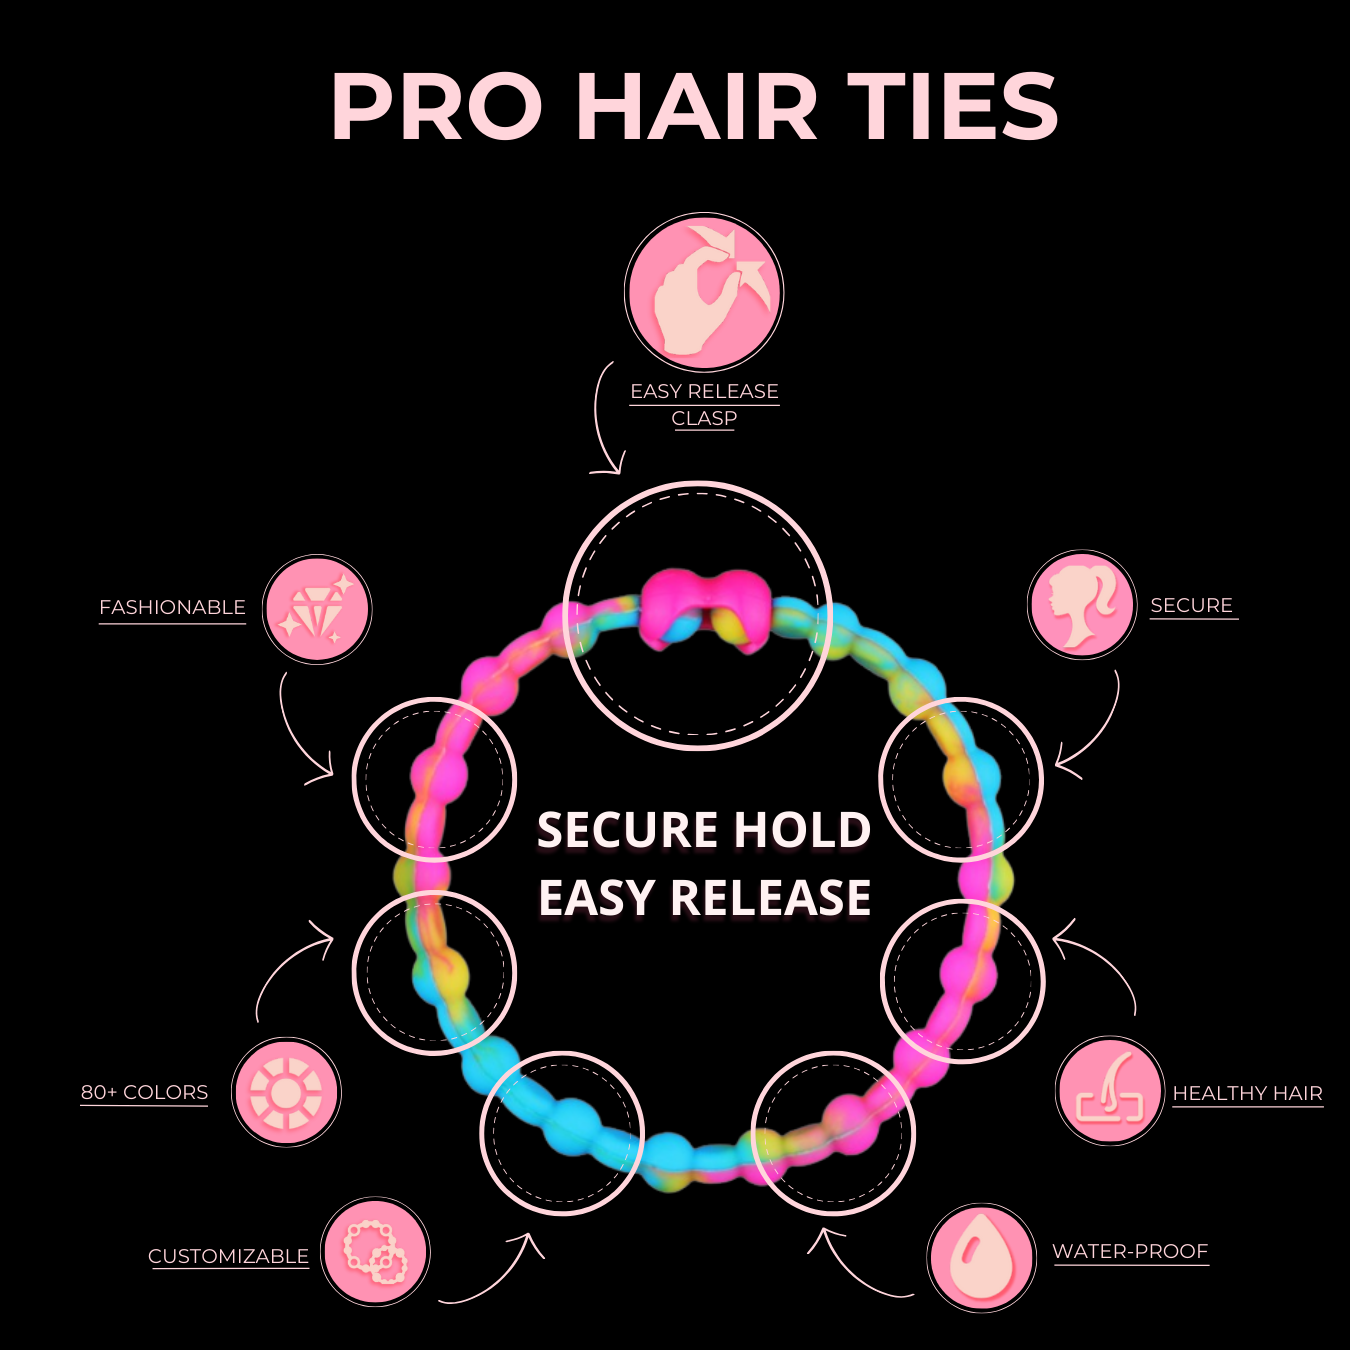 Aqua Marine Pack PRO Hair Ties: Easy Release Adjustable for Every Hair Type PACK OF 8